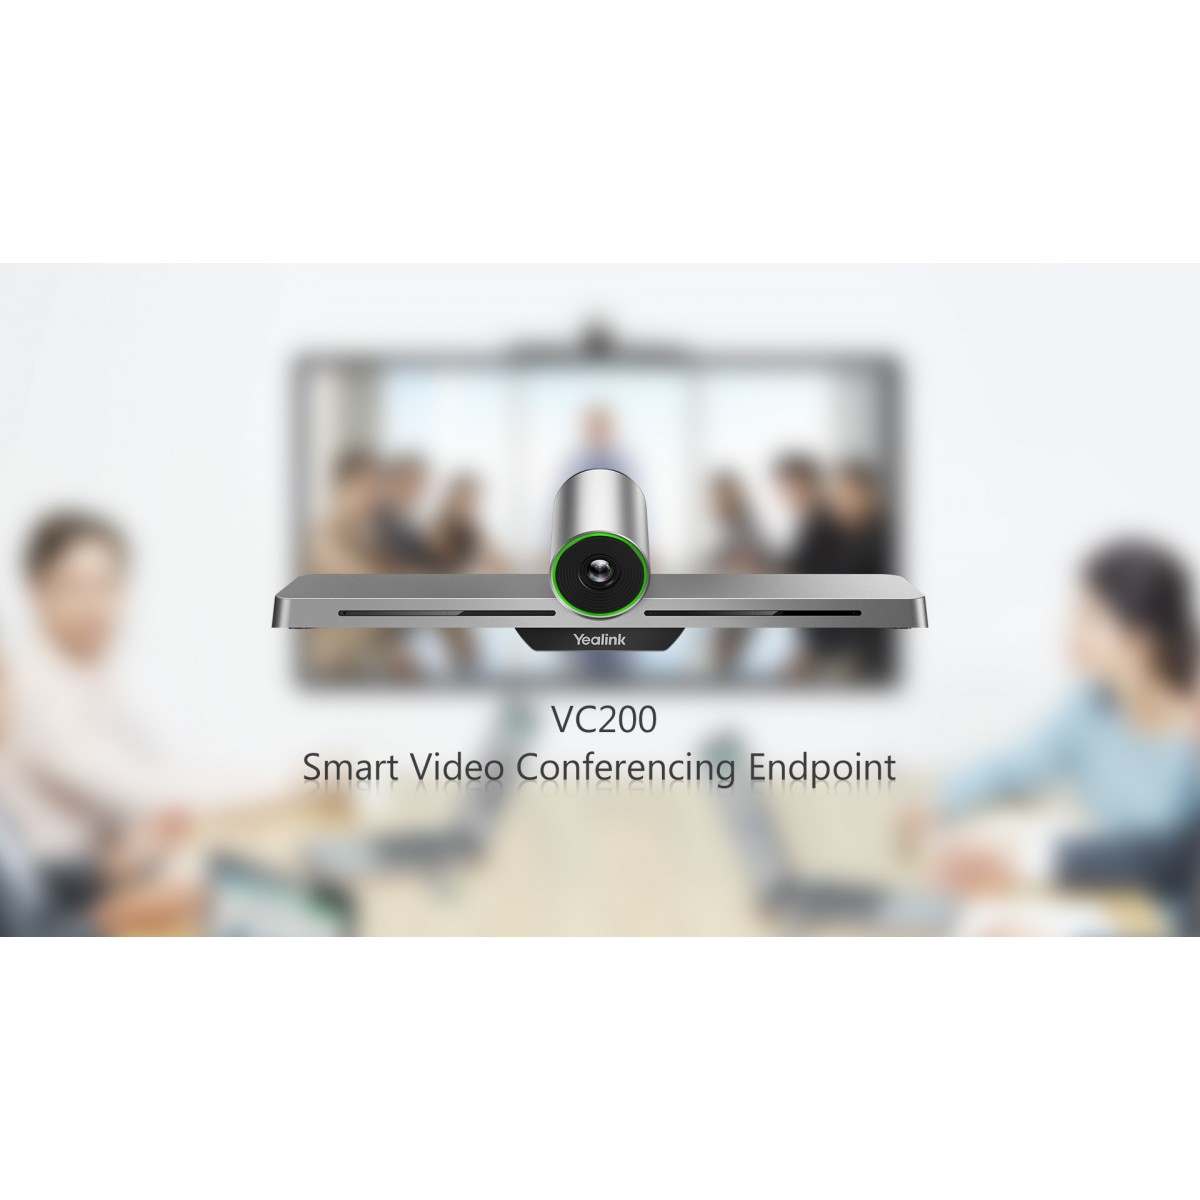 Yealink VC200 Video Conferencing Endpoint